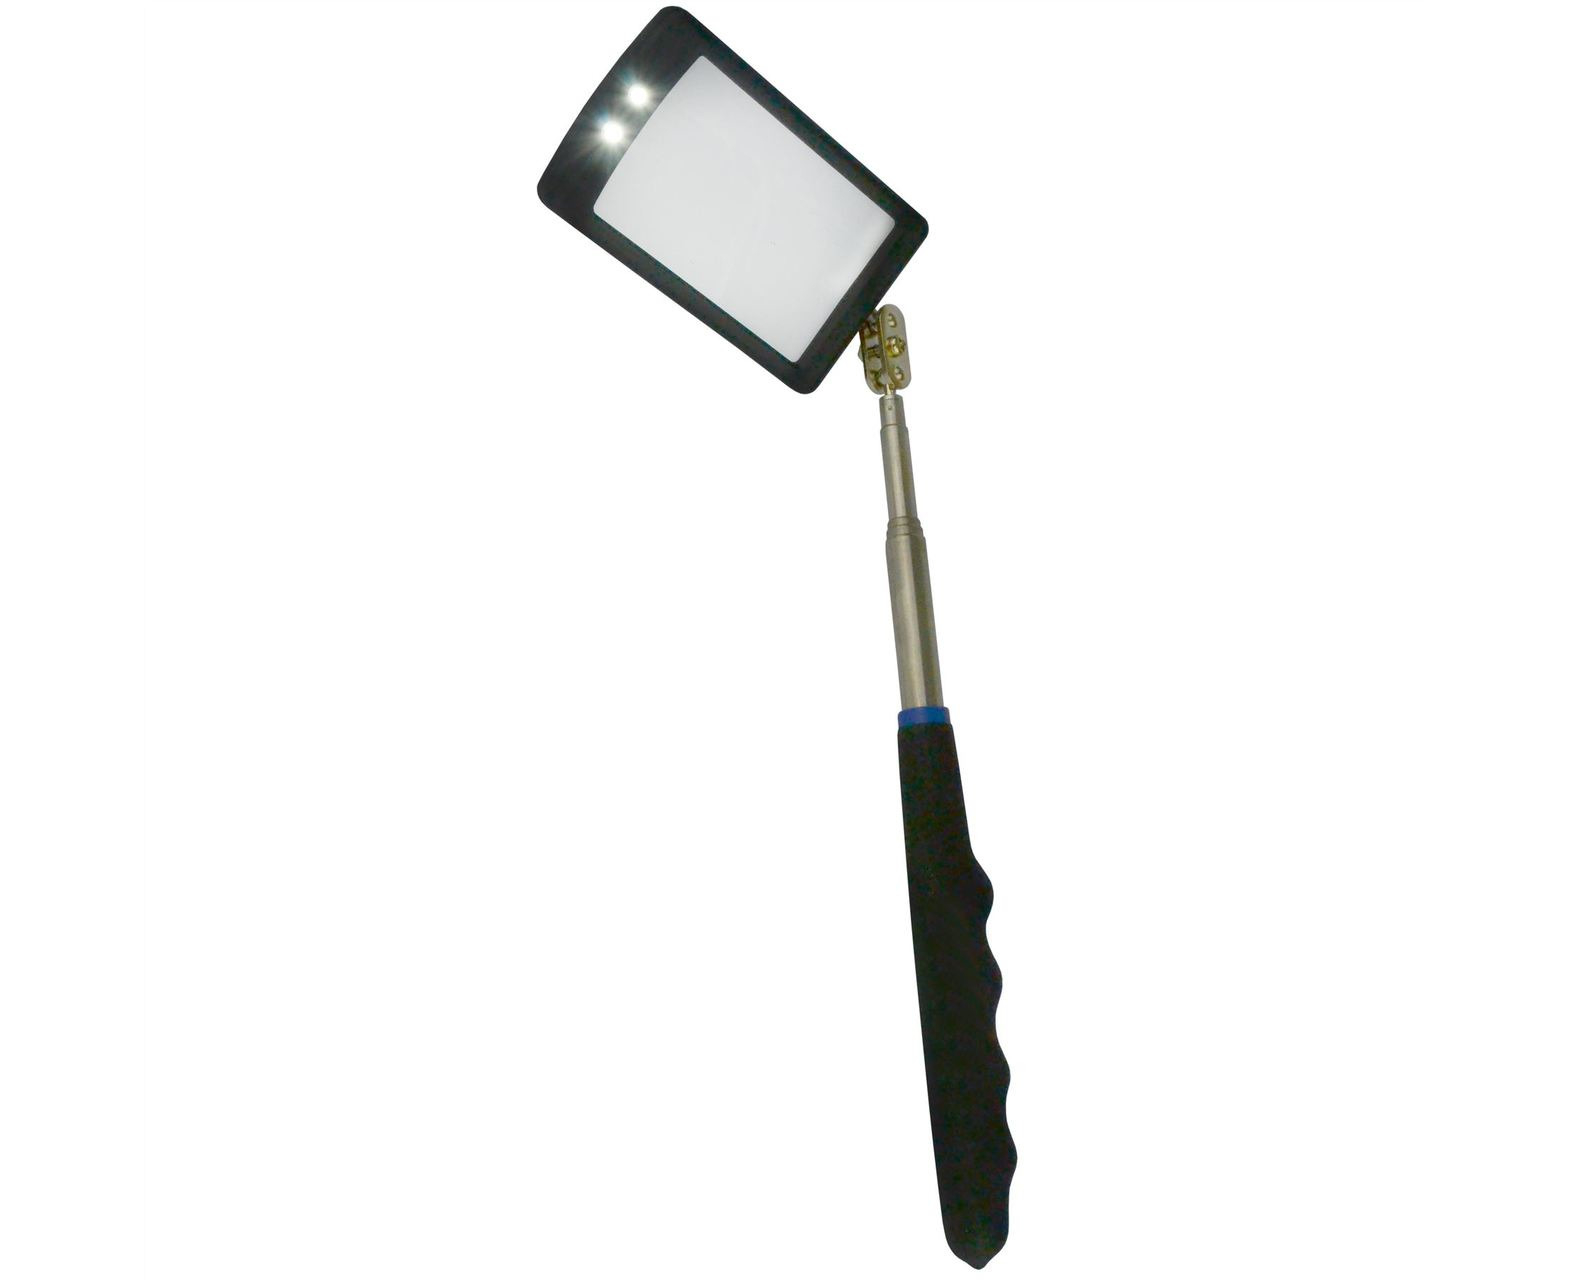 AB Tools-US Pro 5cm Telescopic Extending Inspection Mirror Rubber Grip Size 75-405mm Long AT906 